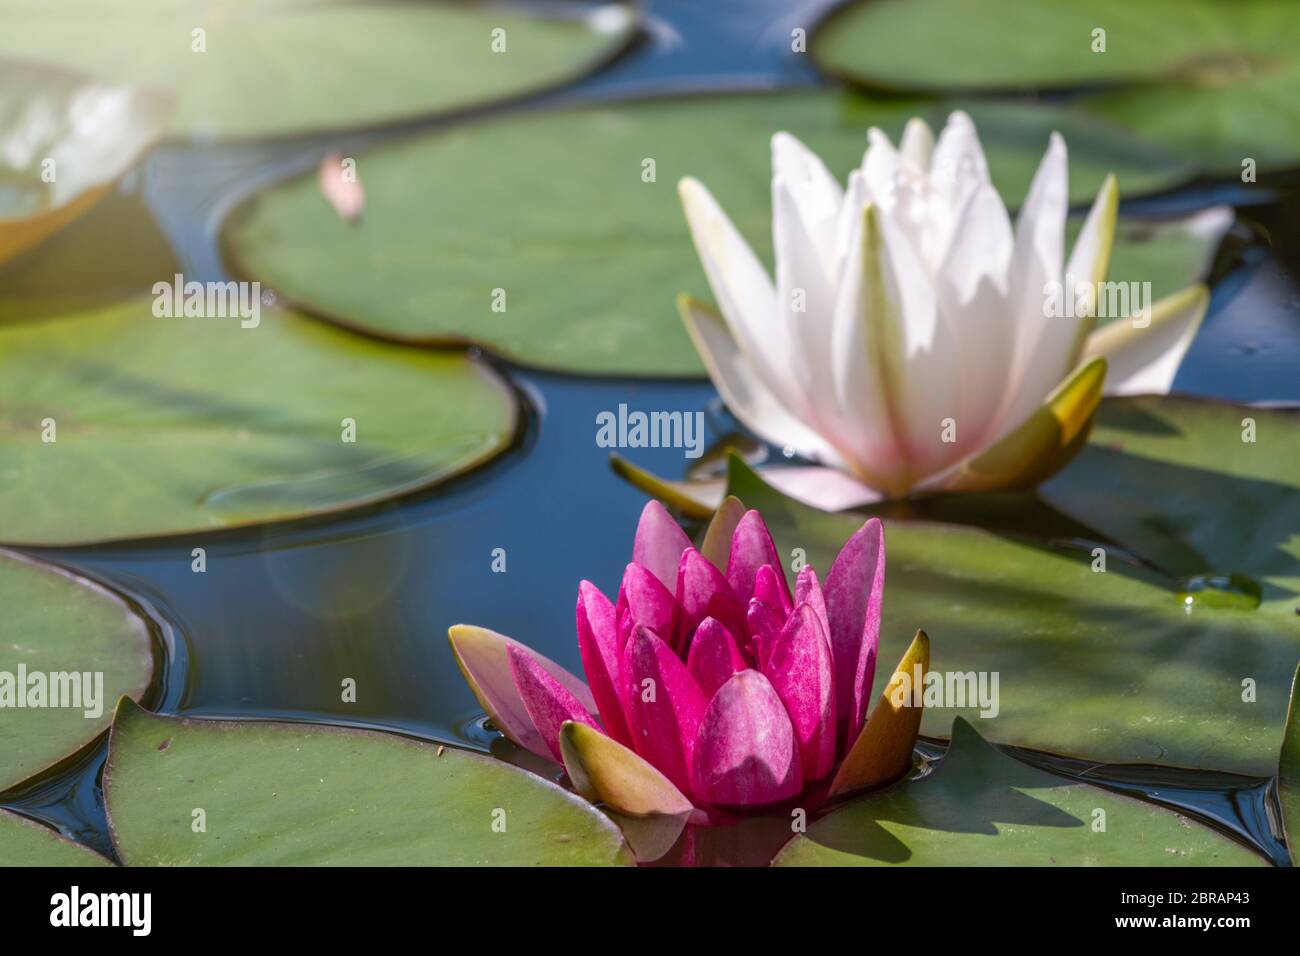 Pink, Nymphaea lotus, and white, Nymphaea alba, water lily flowers, on a green leaves and water background. Two bright water lilies in the pond. Stock Photo